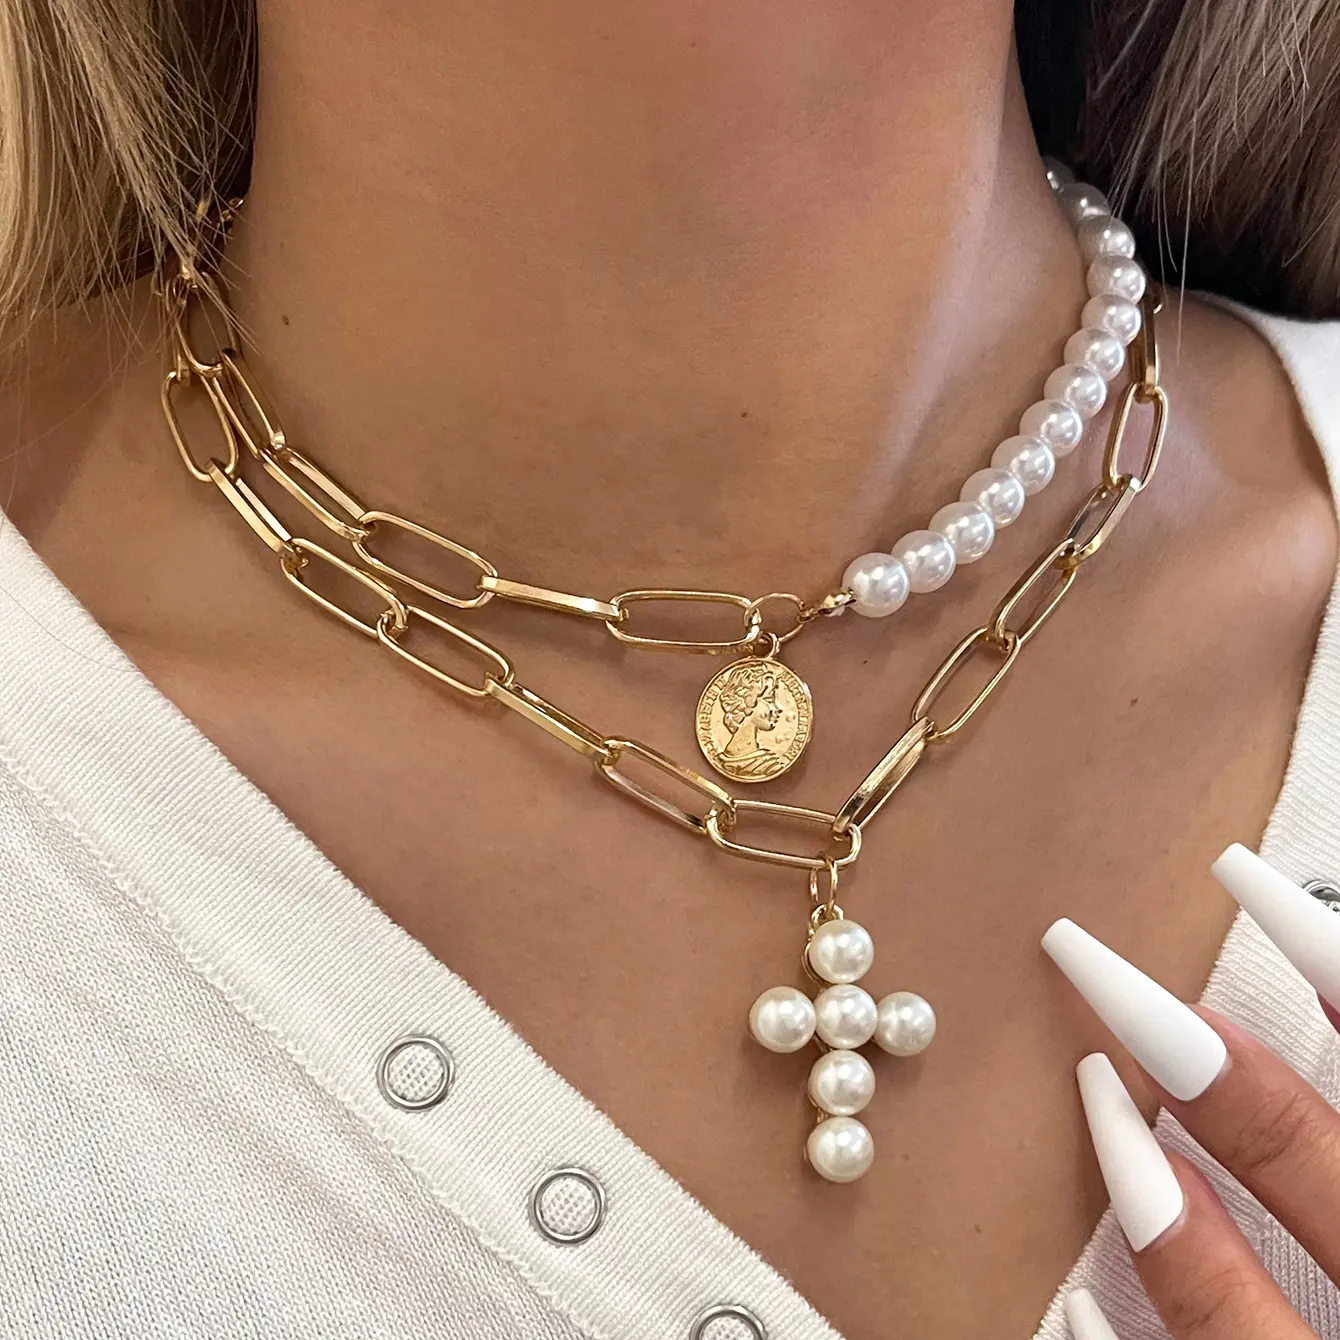 Sandlan Double Pearl Cross Pendant Necklace Vintage Gold Charming Pearl Necklace Gift For Women